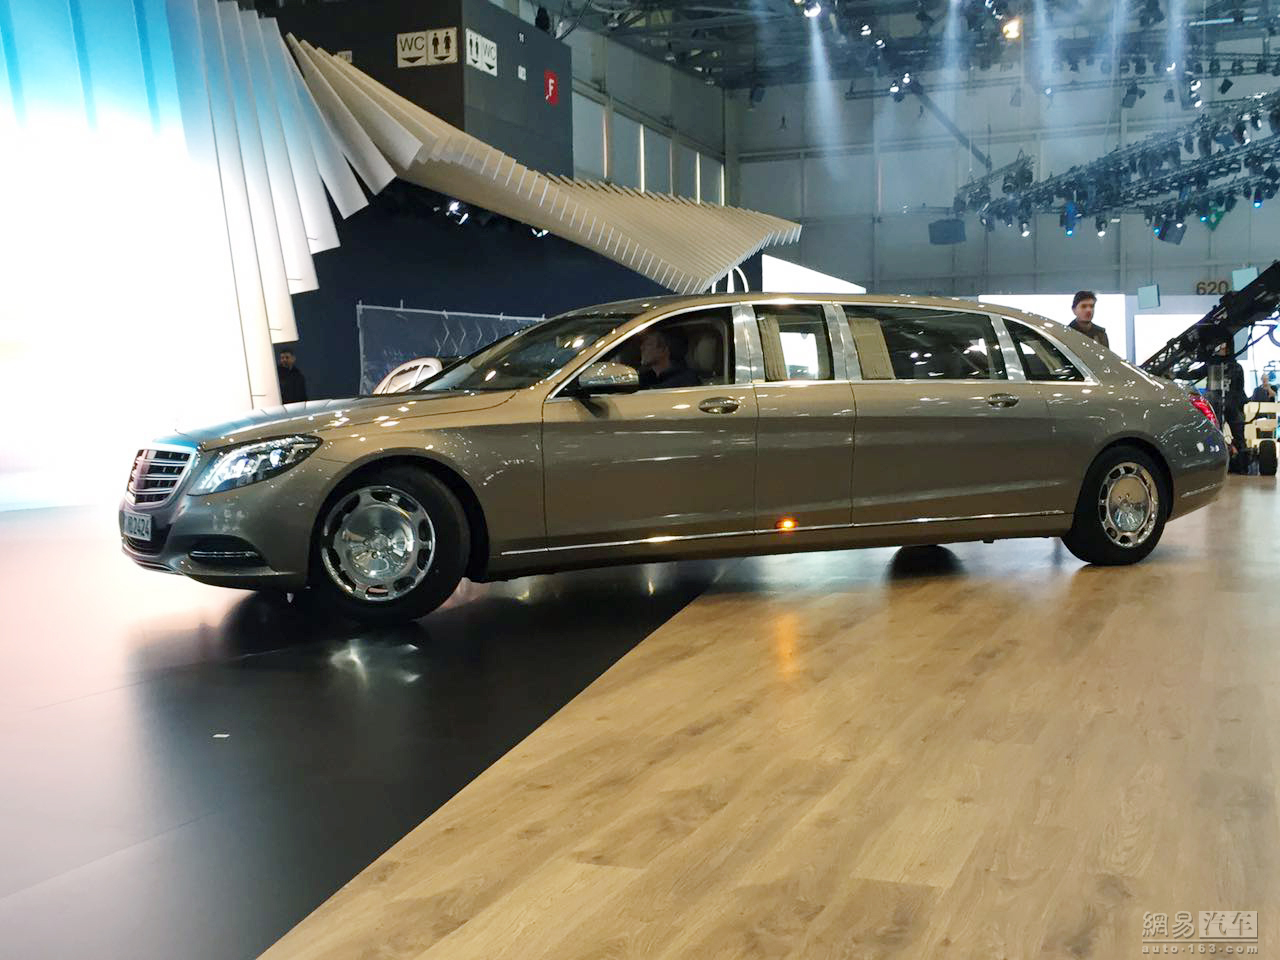 Mercedes Maybach S600 Pullman Spotted In Geneva Ahead Of